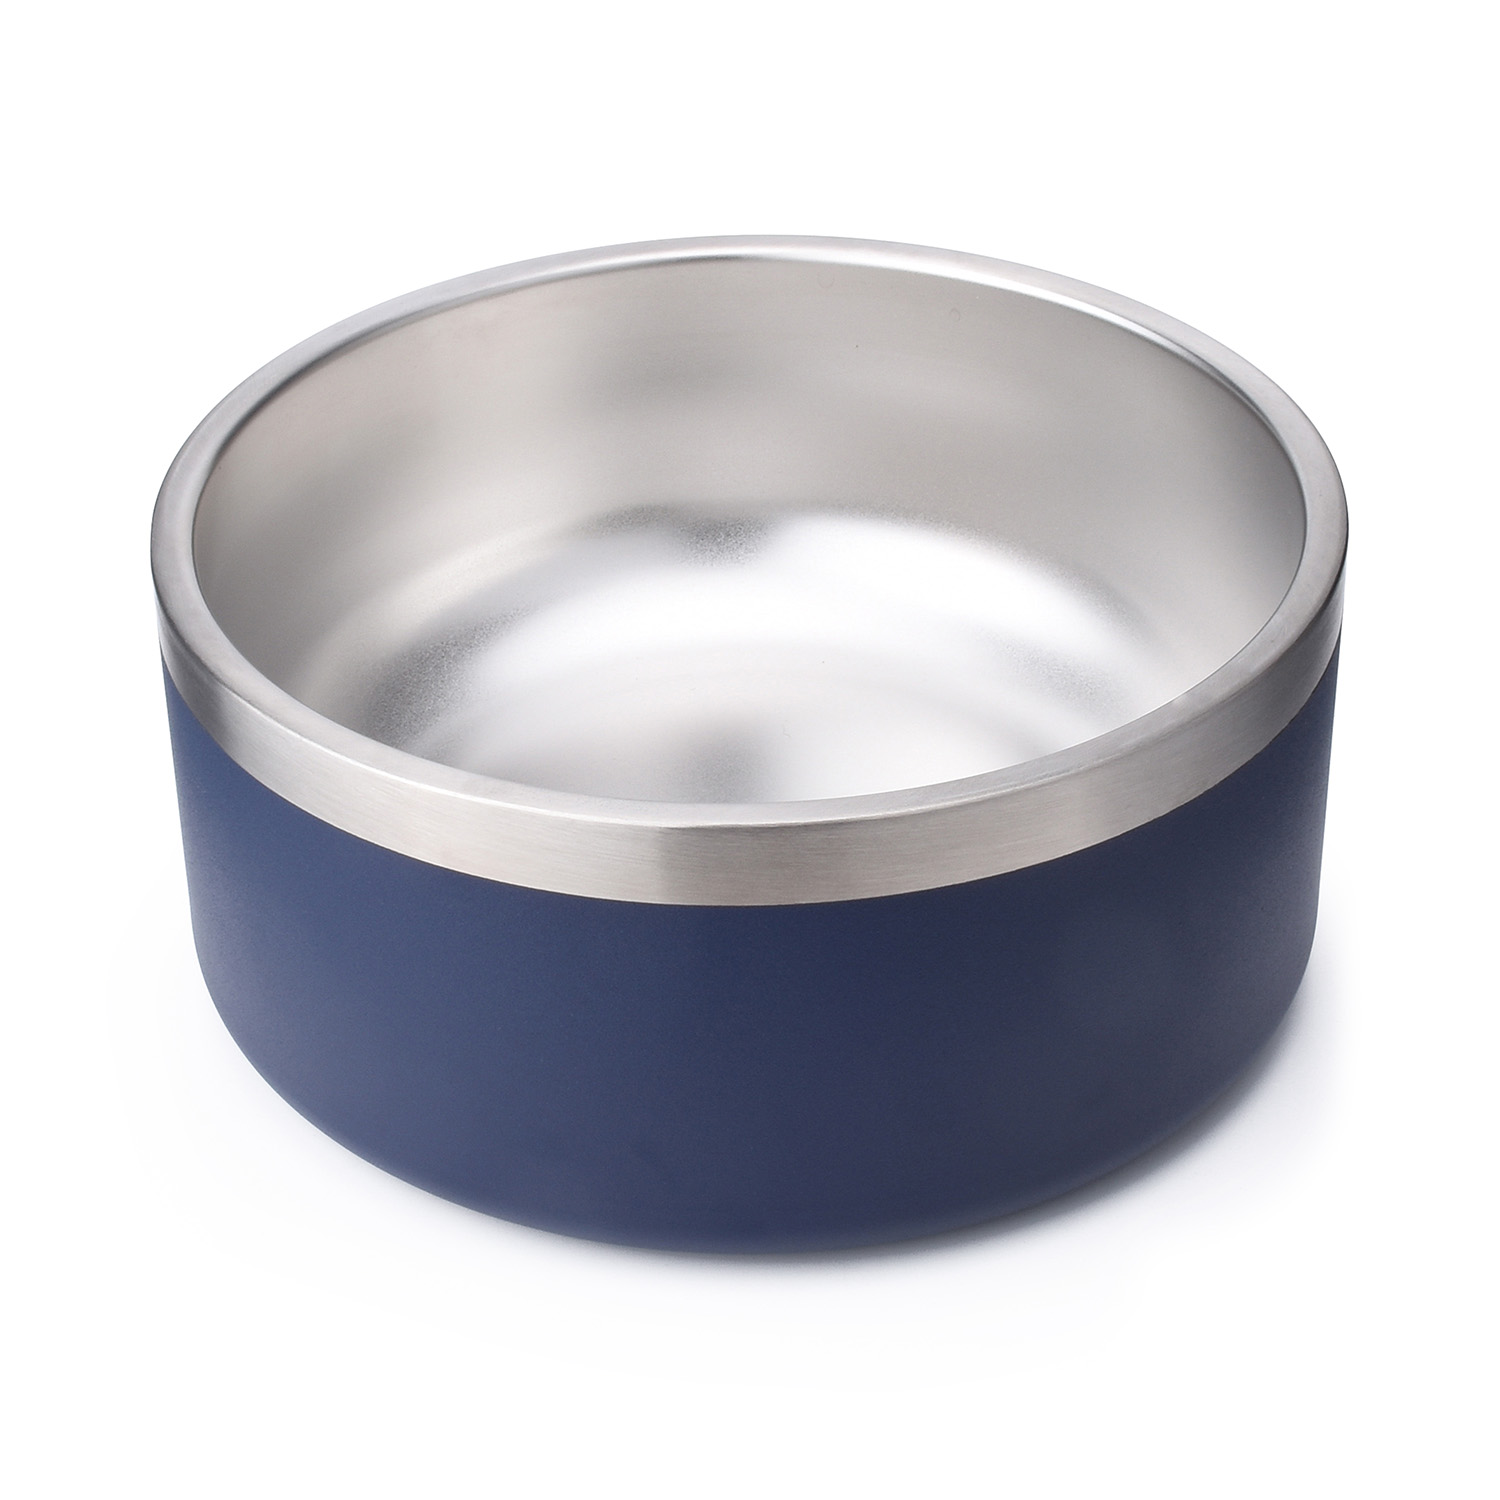 Wholesale Stainless Steel Double Dog Bowls for Food Water with